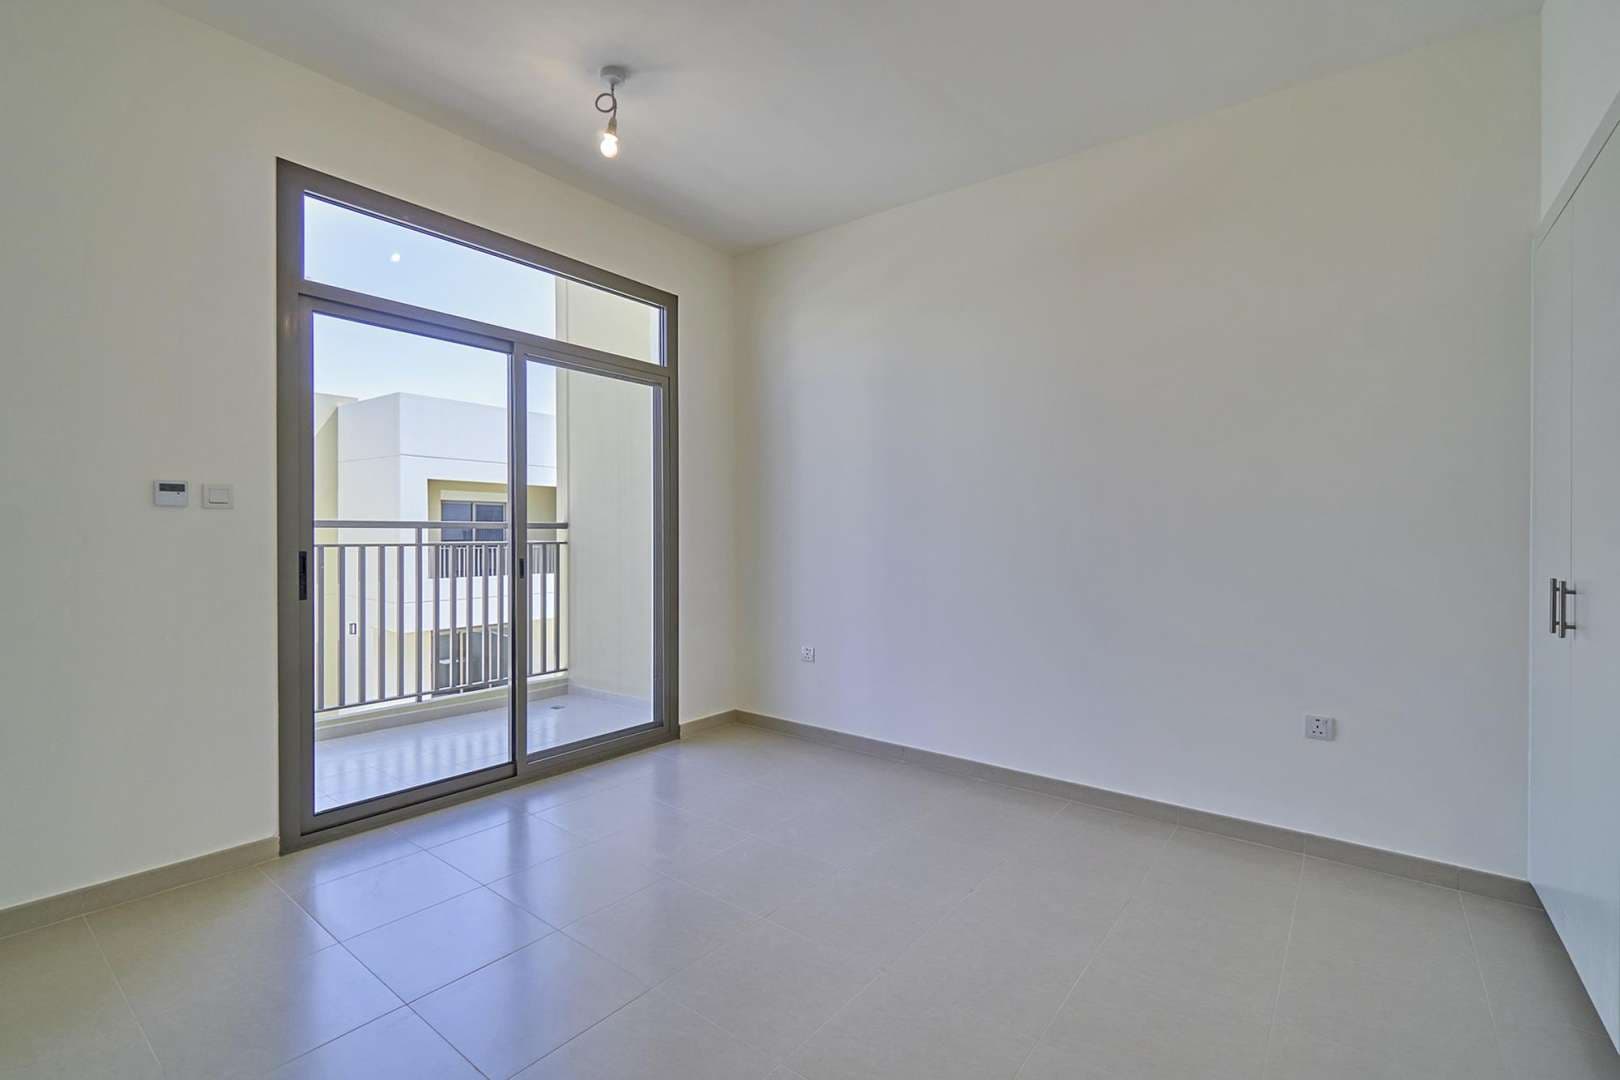 3 Bedroom Townhouse For Sale Naseem Townhouses Lp08121 2bb5a875f01a7c00.jpg